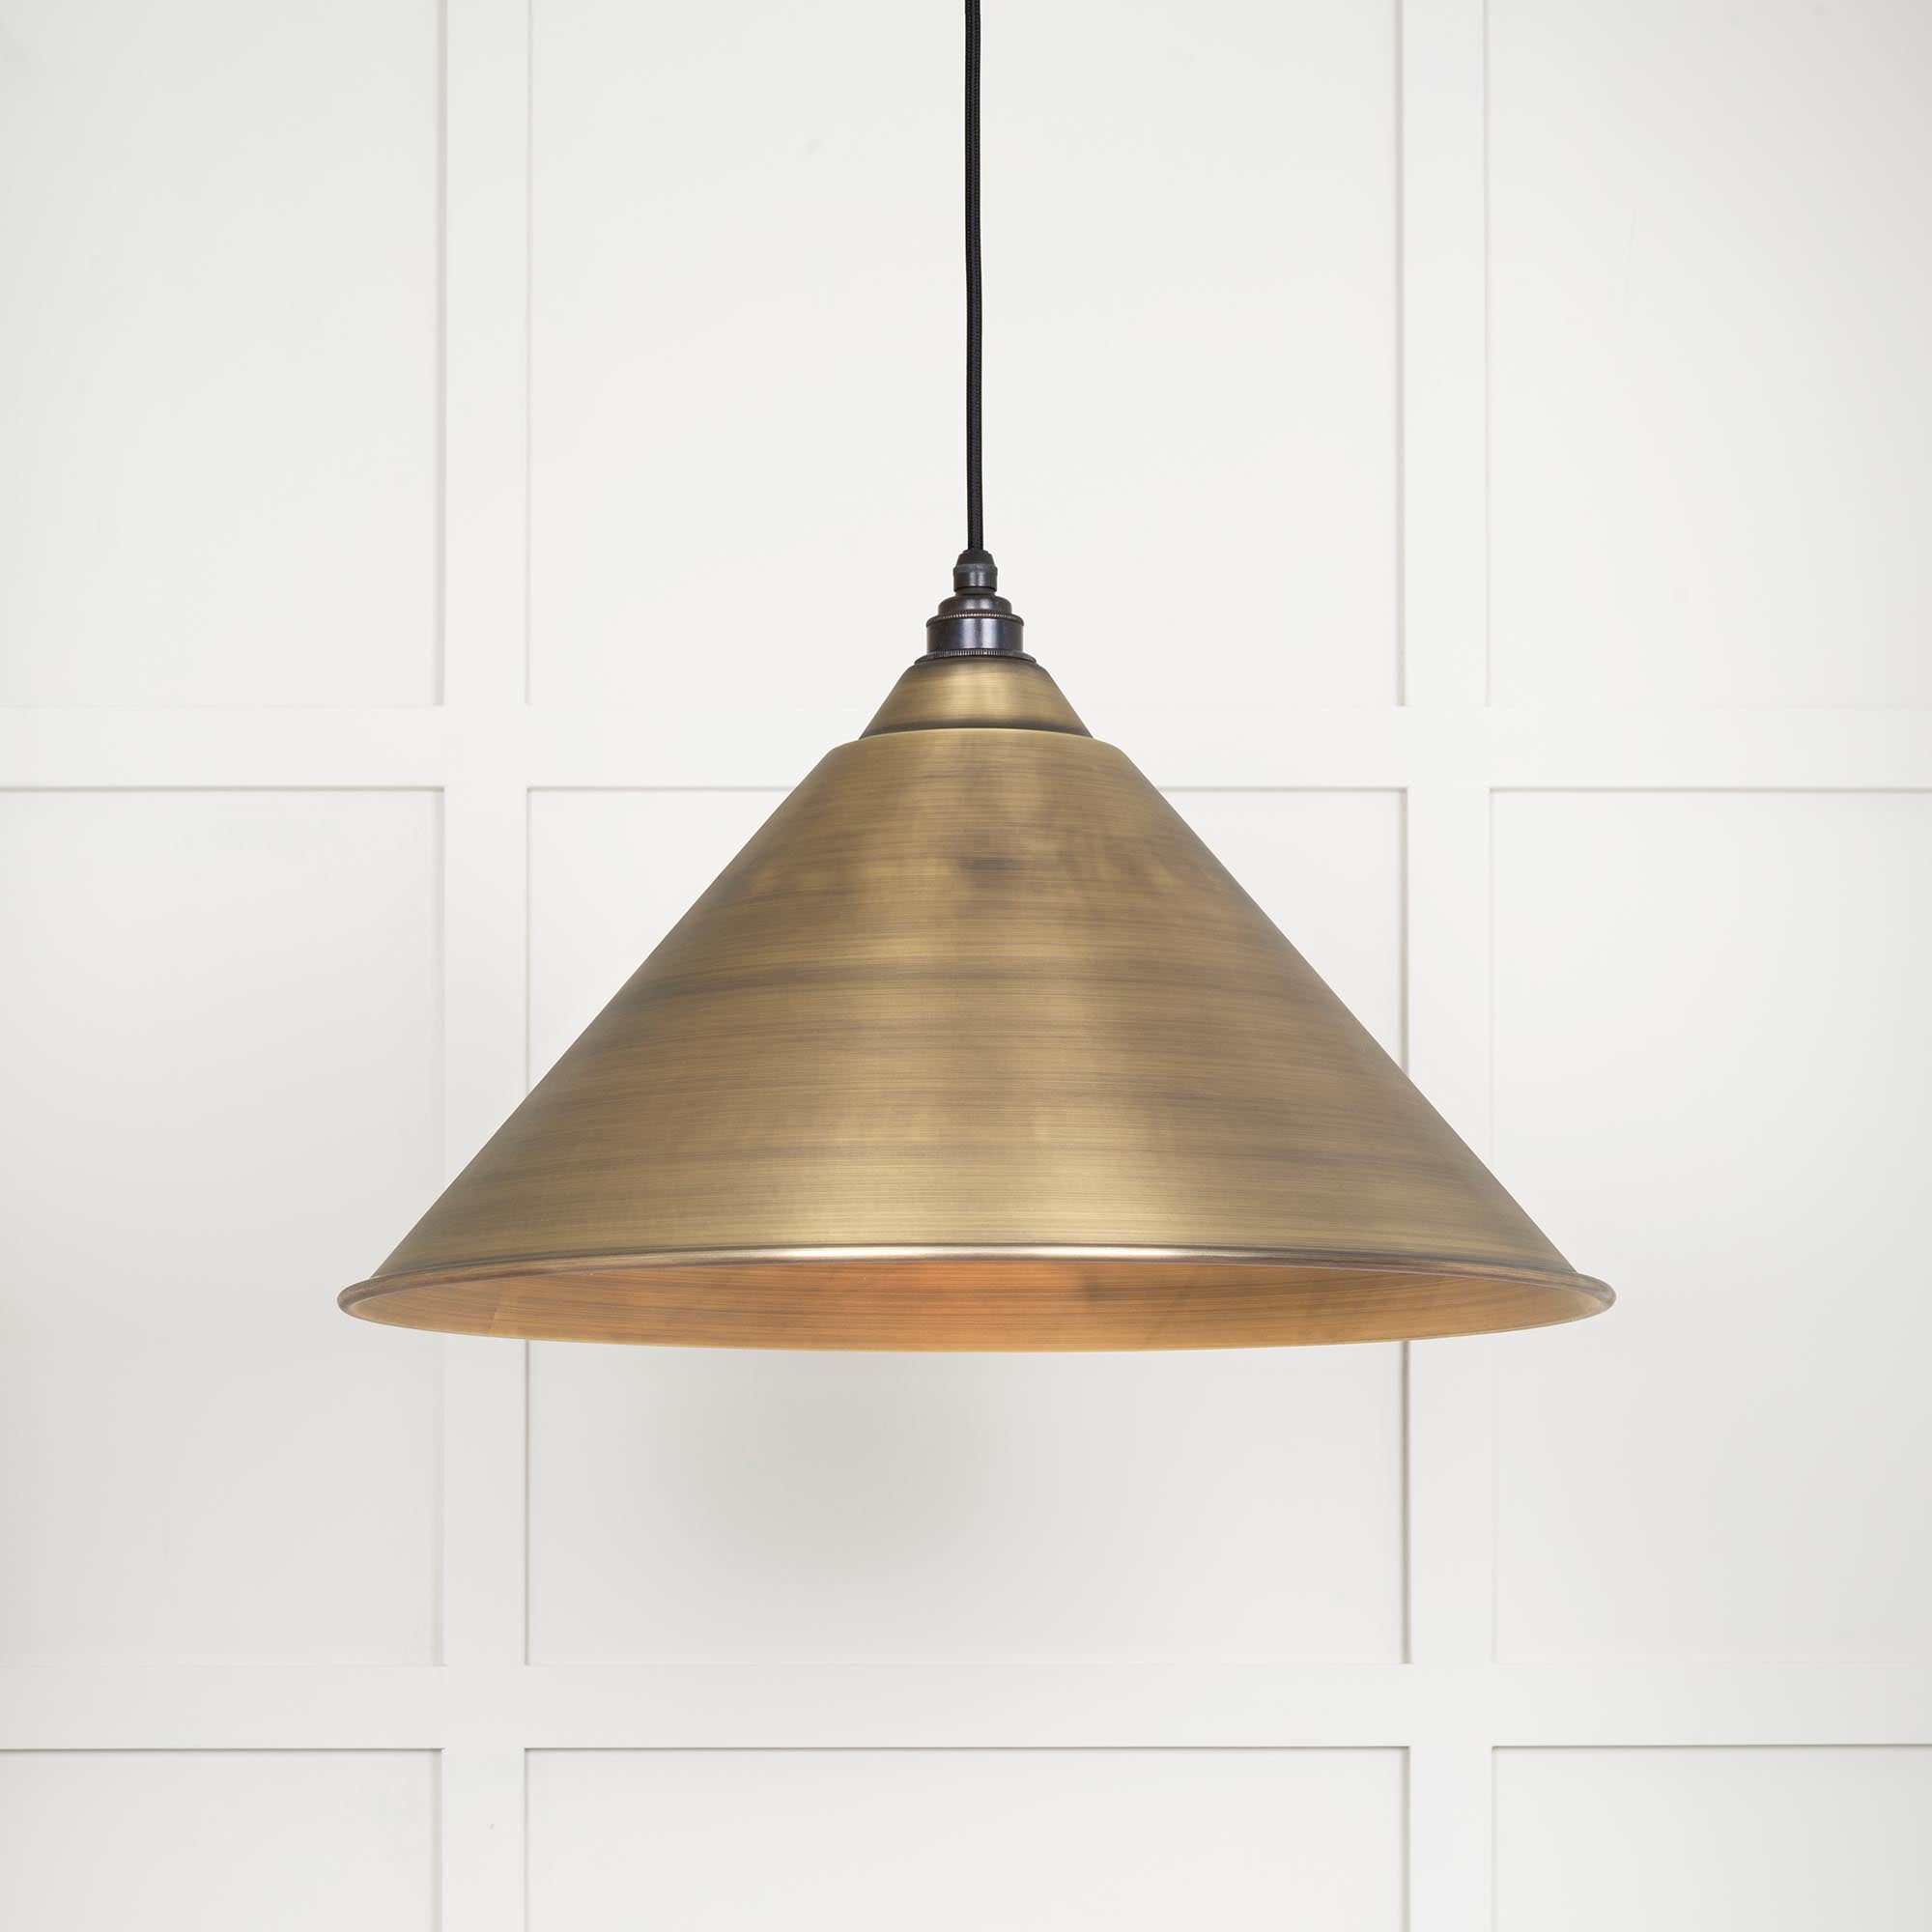 Image of Hockley Ceiling Light in Aged Brass